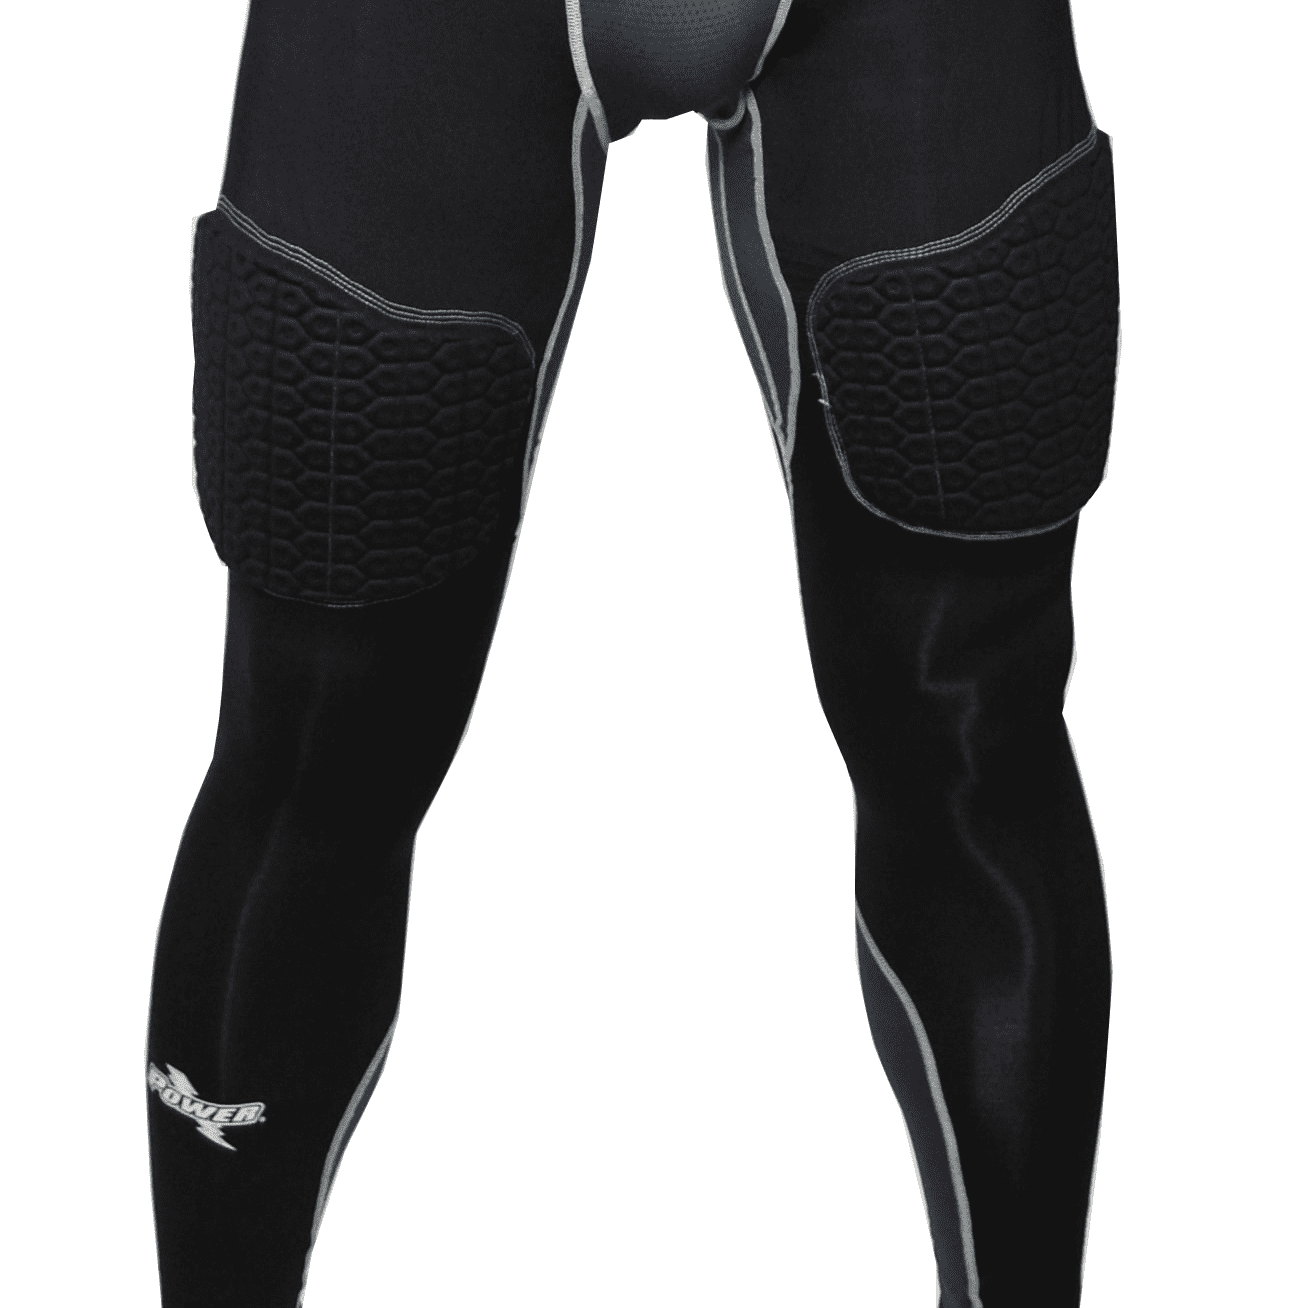 Riddell 5 Piece Integrated Football Tights, Black, Adult X-Large 